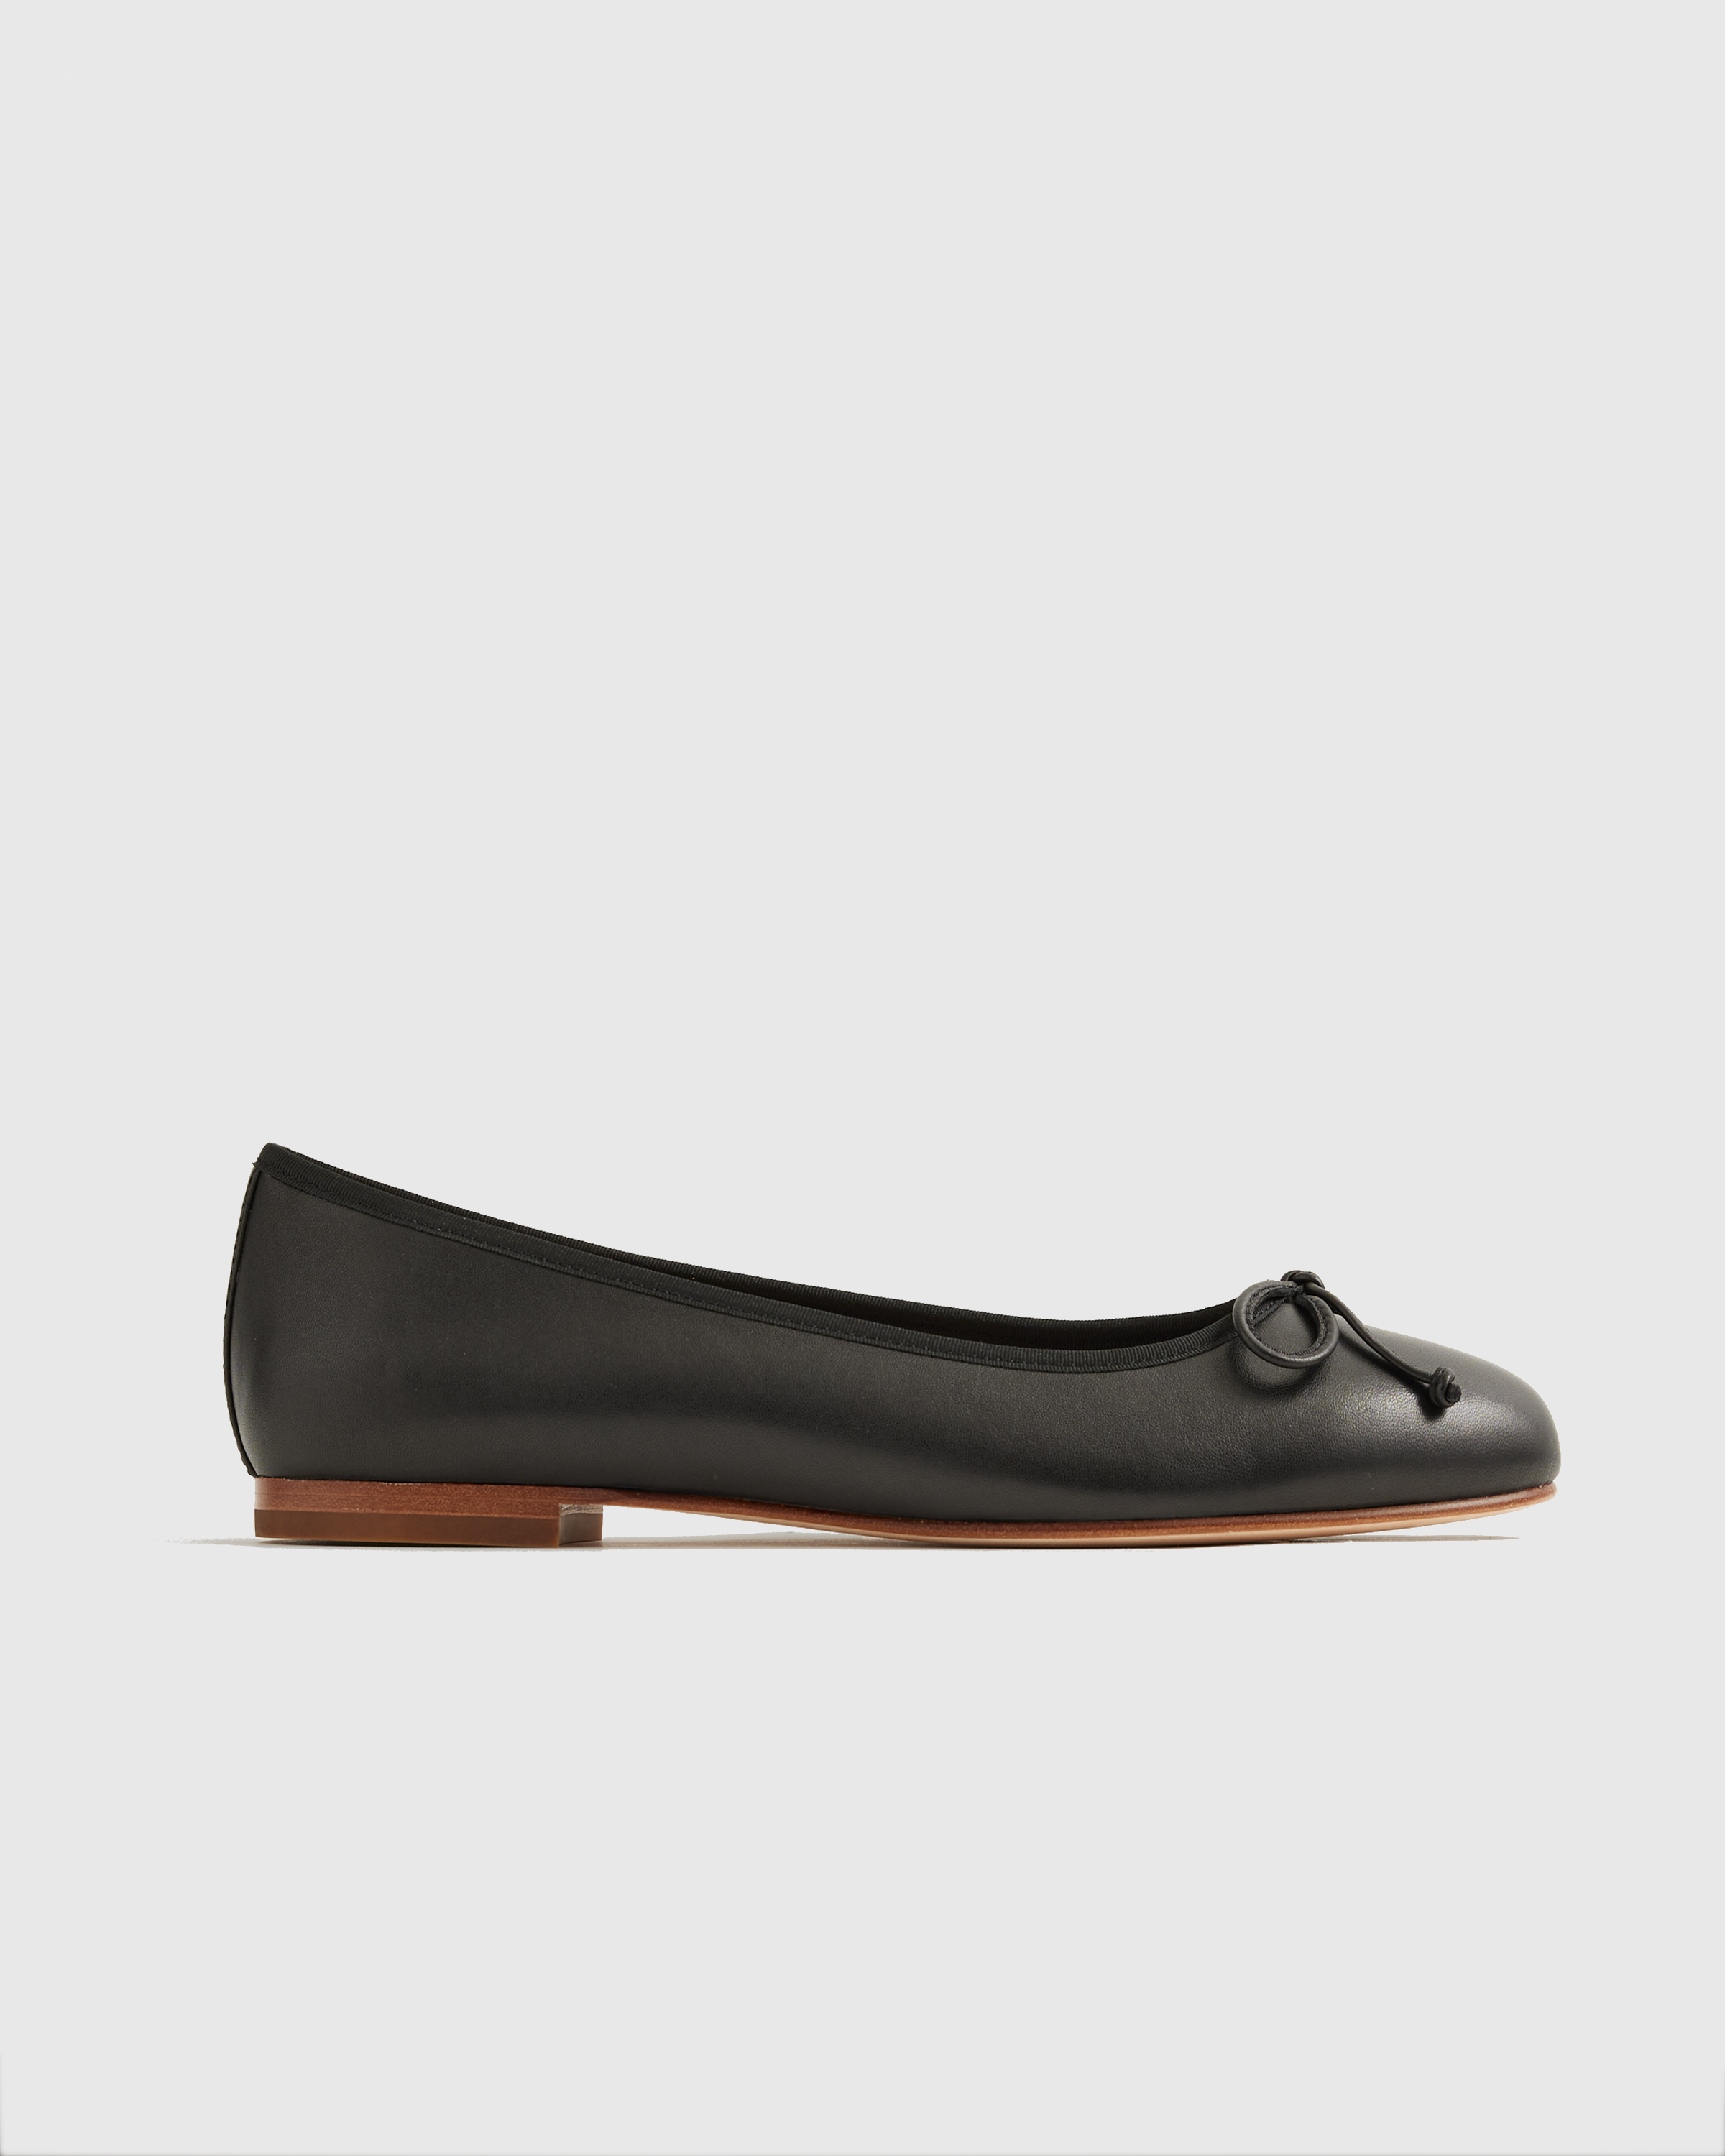 Quince Women's Italian Leather Bow Ballet Flat In Black